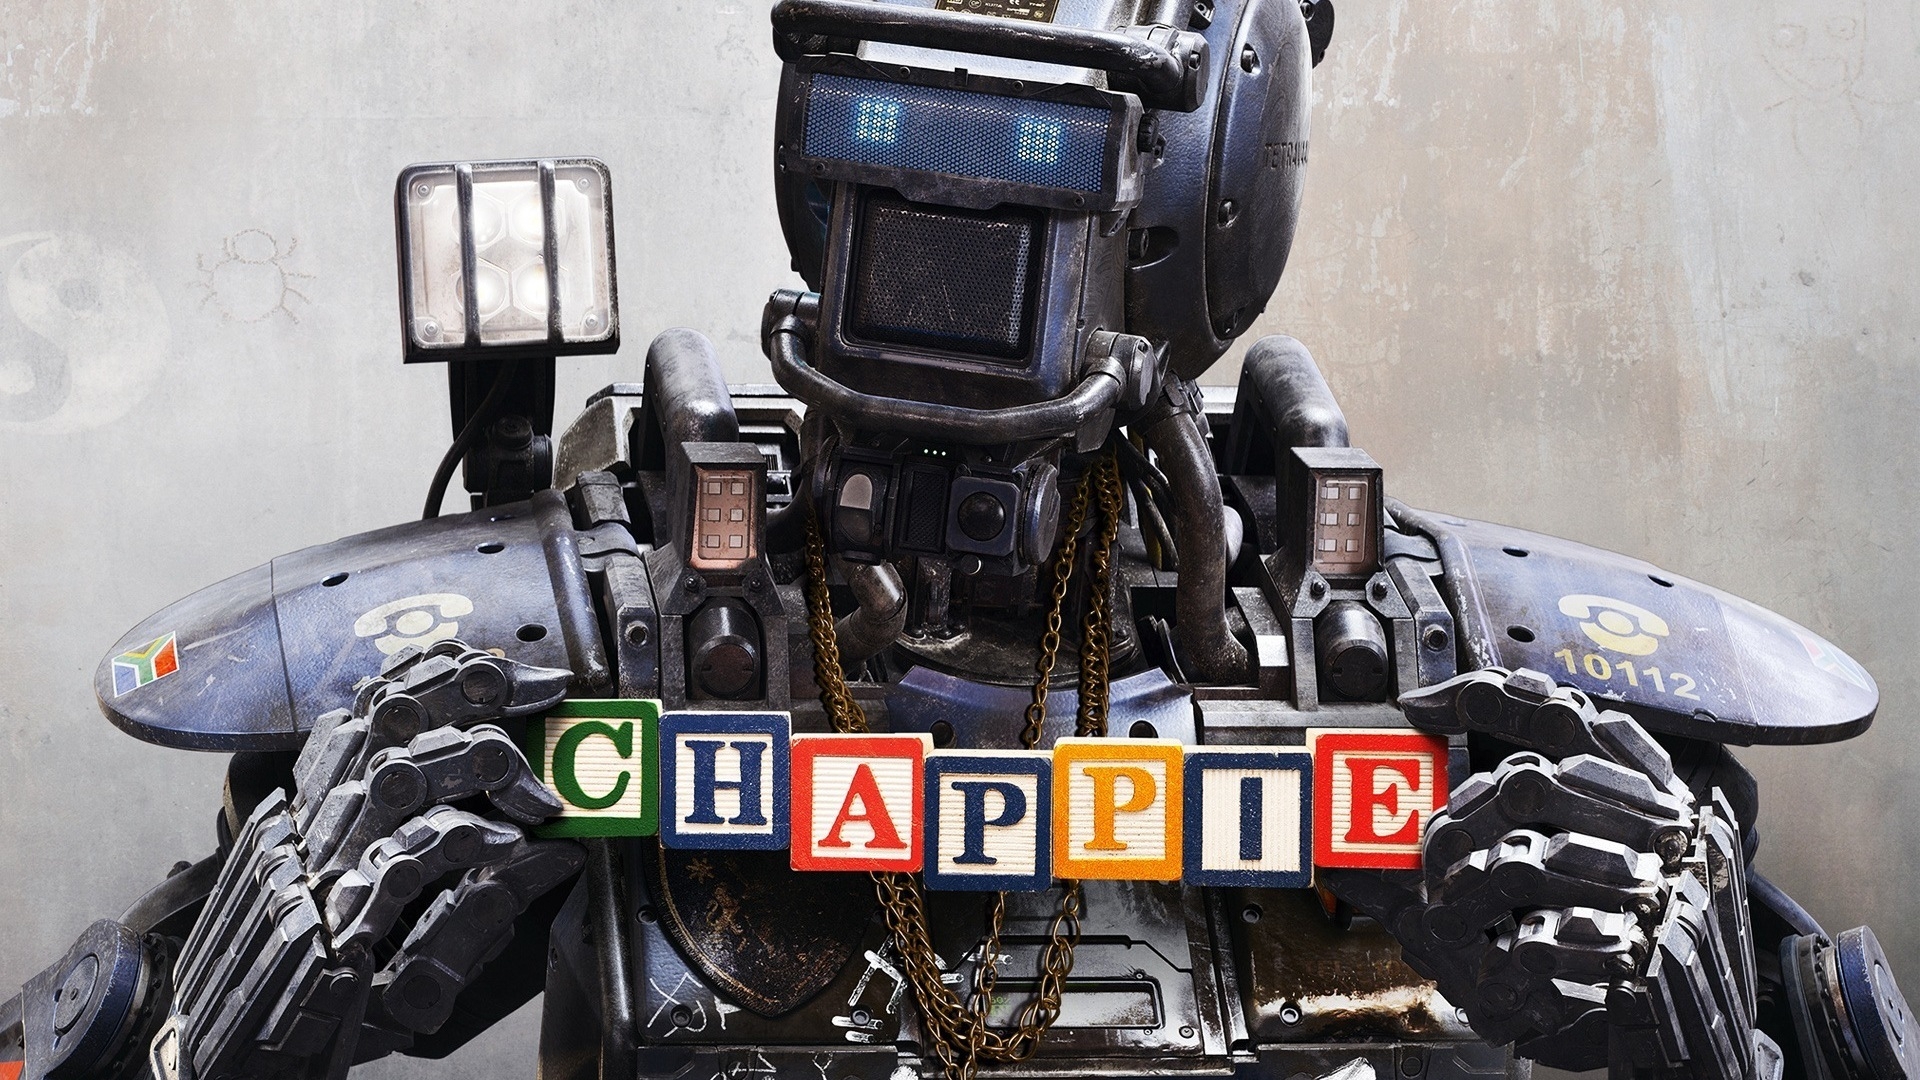 Chappie Robot for 1920 x 1080 HDTV 1080p resolution